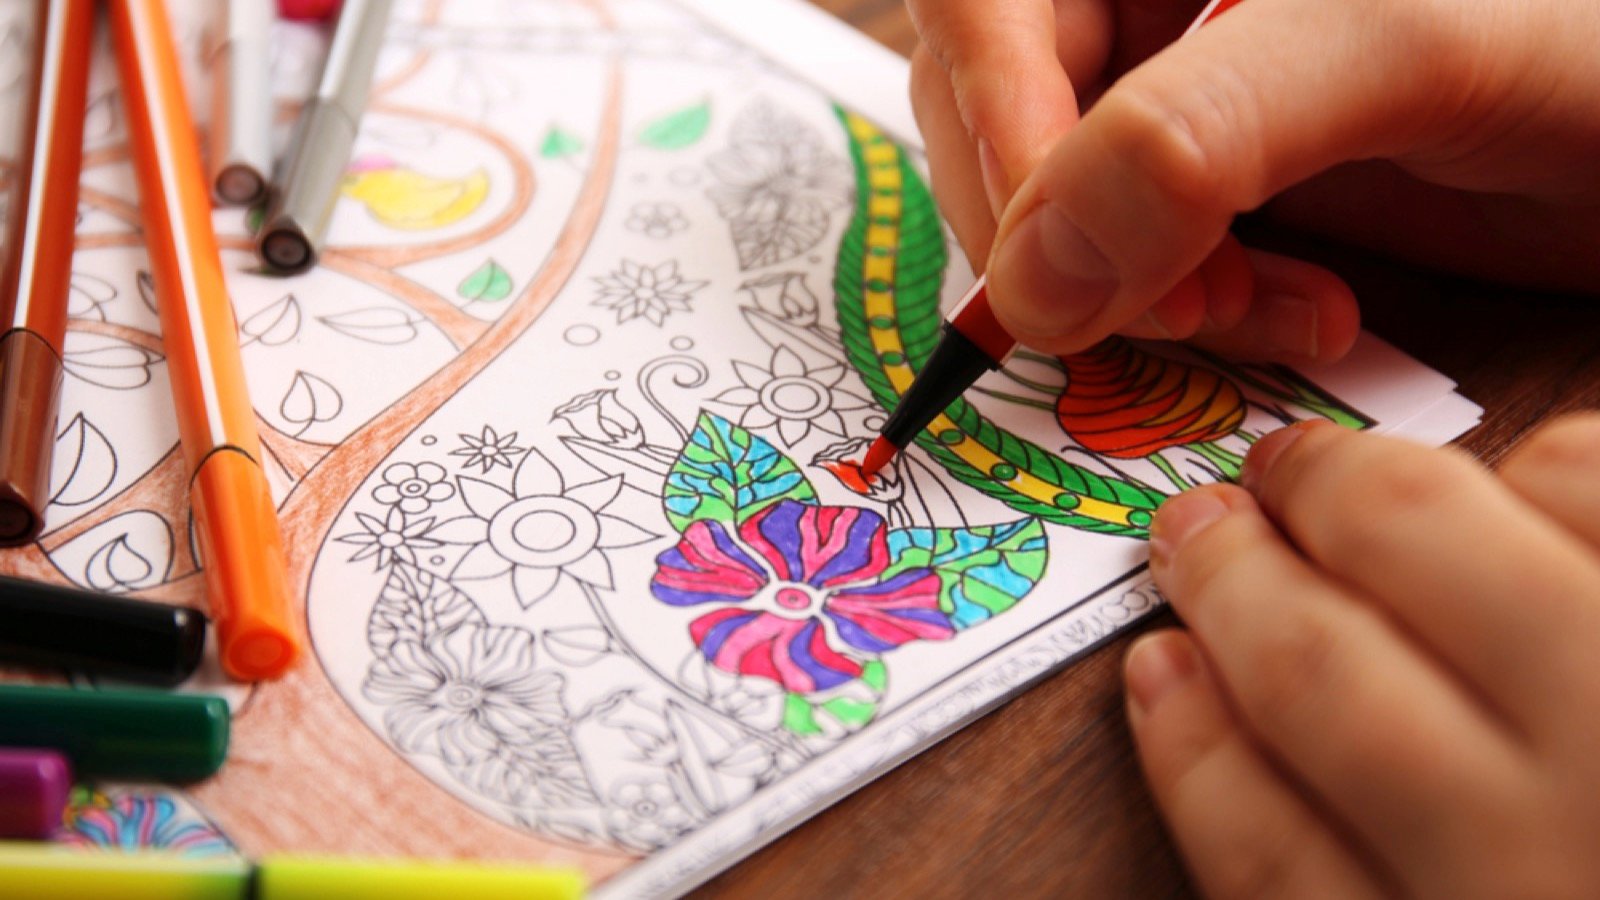 <p>Adult coloring books took off in a way that surprised many of us. We were sure we <a href="https://www.kindafrugal.com/17-norms-of-the-past-were-glad-we-left-behind/">left that all behind</a> in kindergarten, but sales figures were impressive for the most imaginative designs.</p><p>We shouldn’t be shocked. Coloring is a calming activity that can help us achieve a meditative state. While some skills are involved, they’re not as complex as some of the hobbies on this list, so coloring books are a good option for all creative talents.</p>